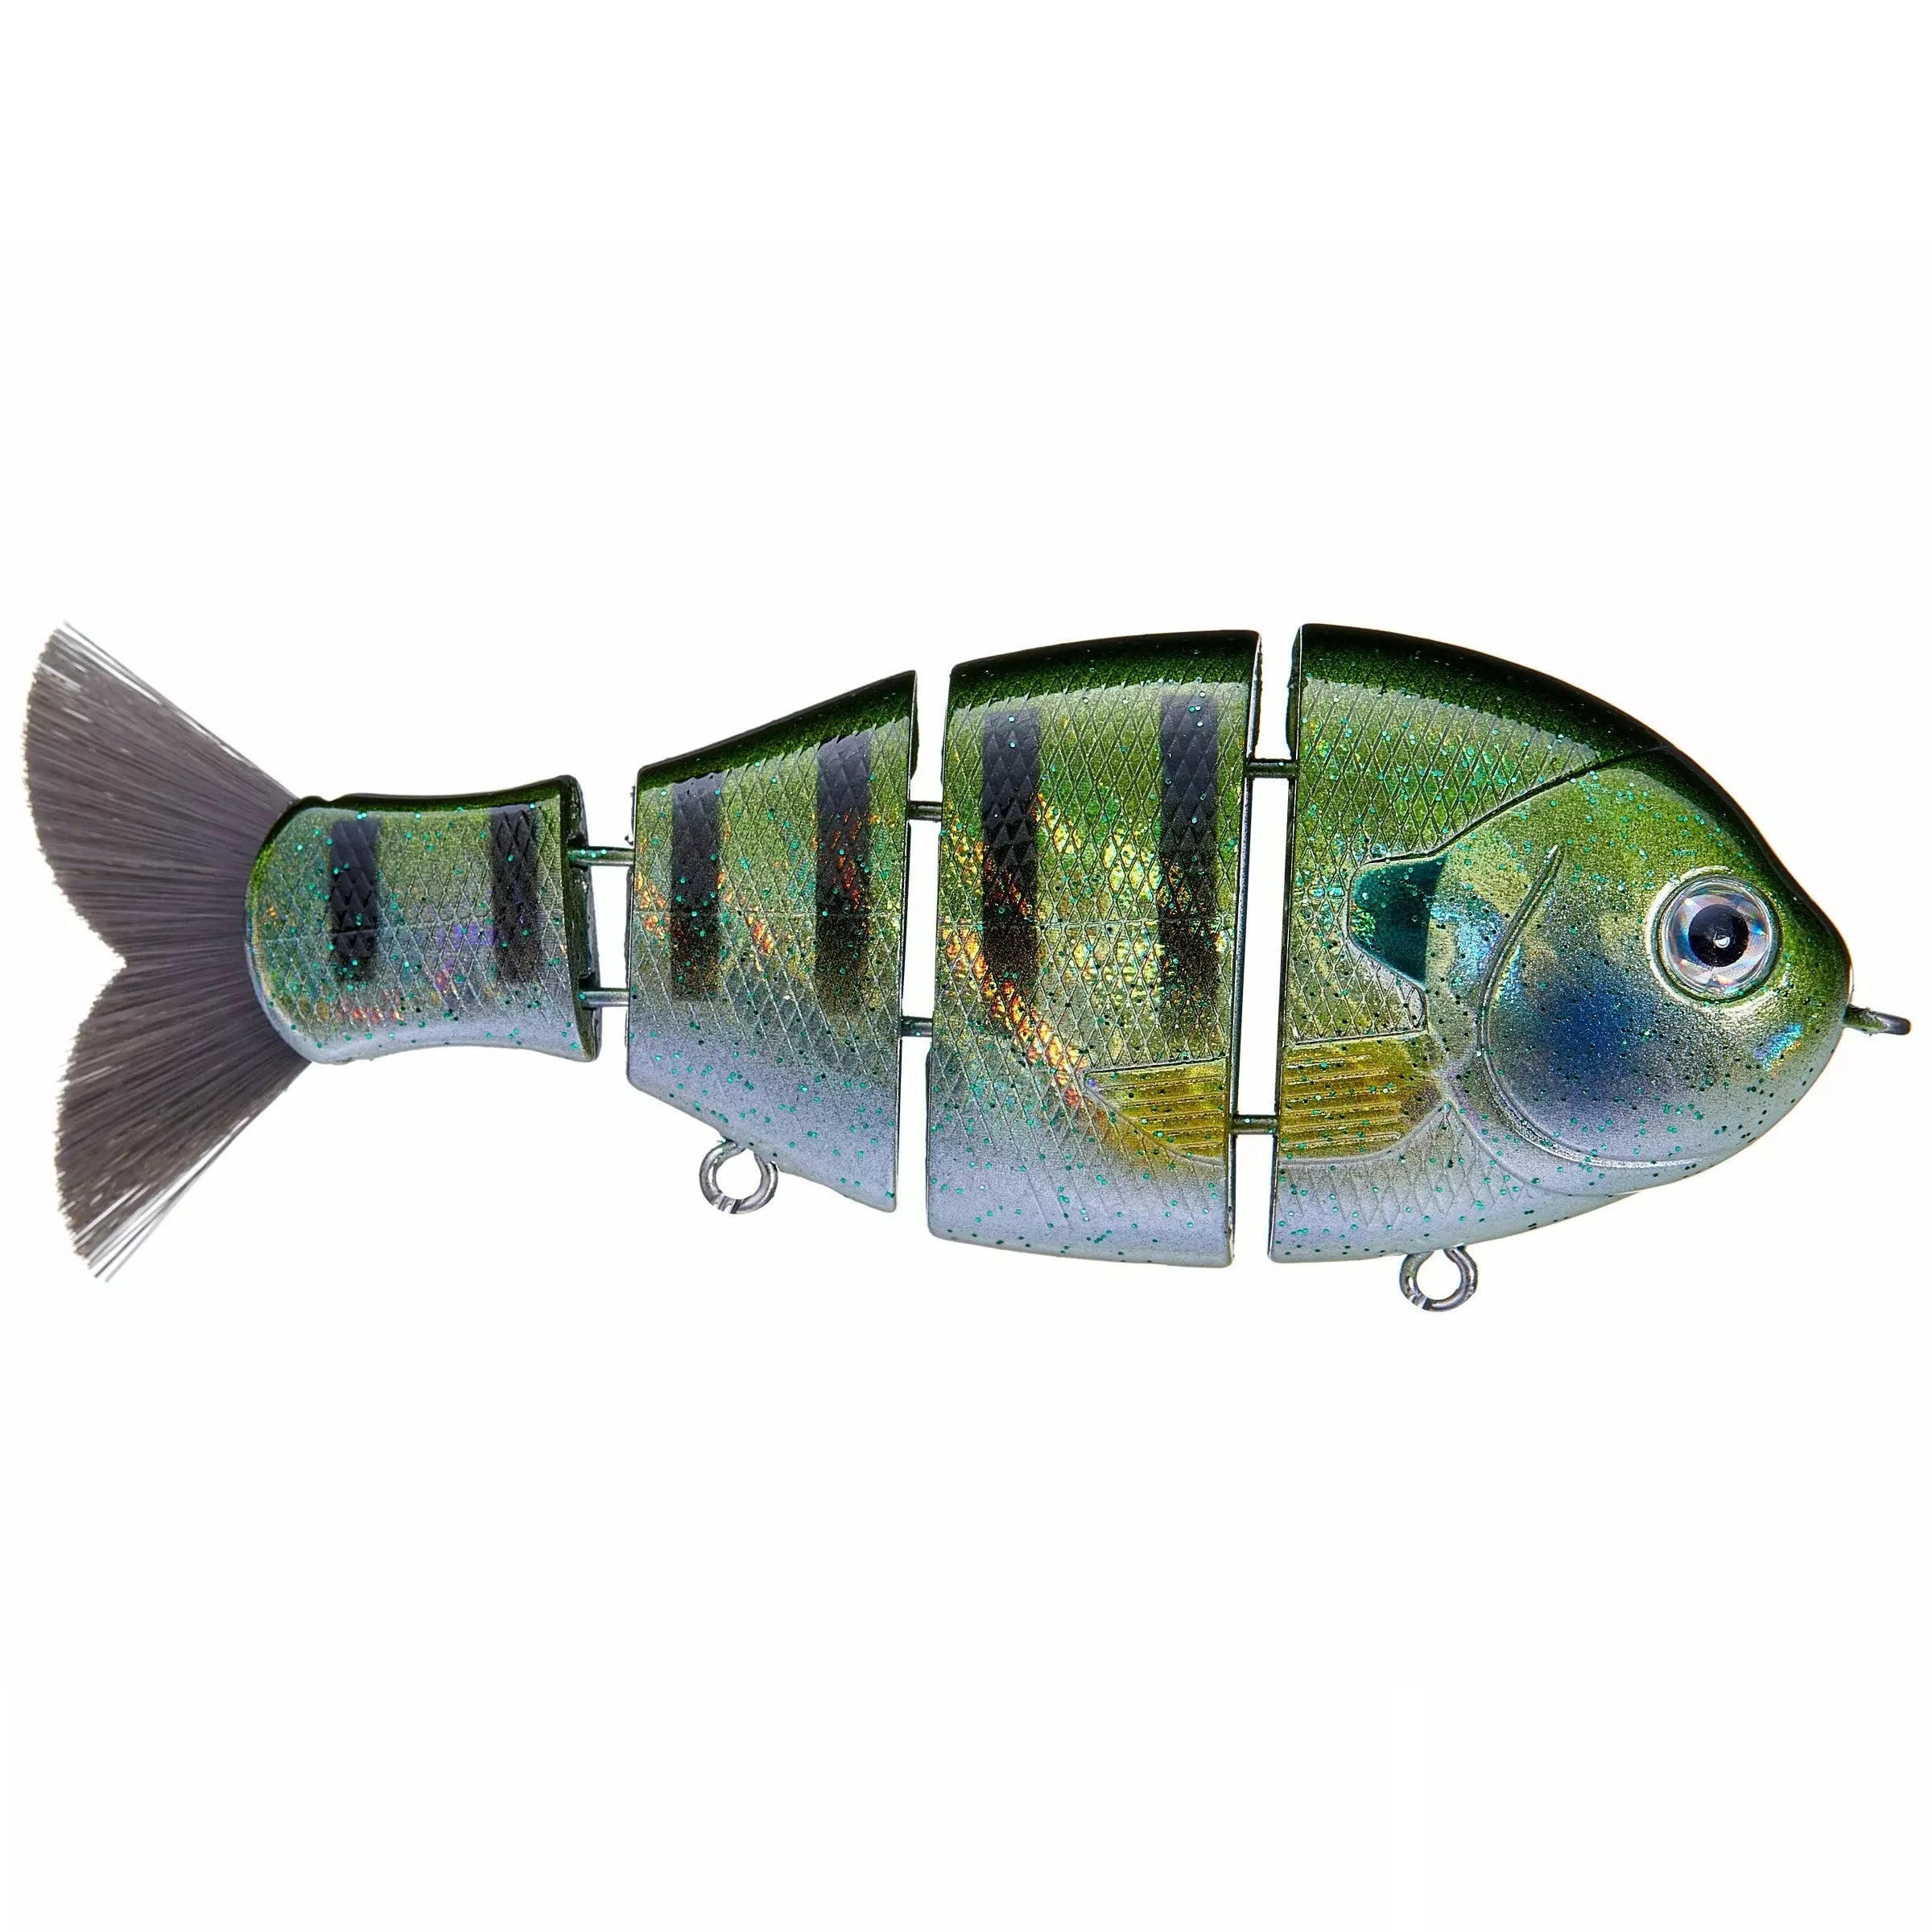 Buy natural-gill CATCH CO. BABY BULL GILL SWIMBAIT 3.75